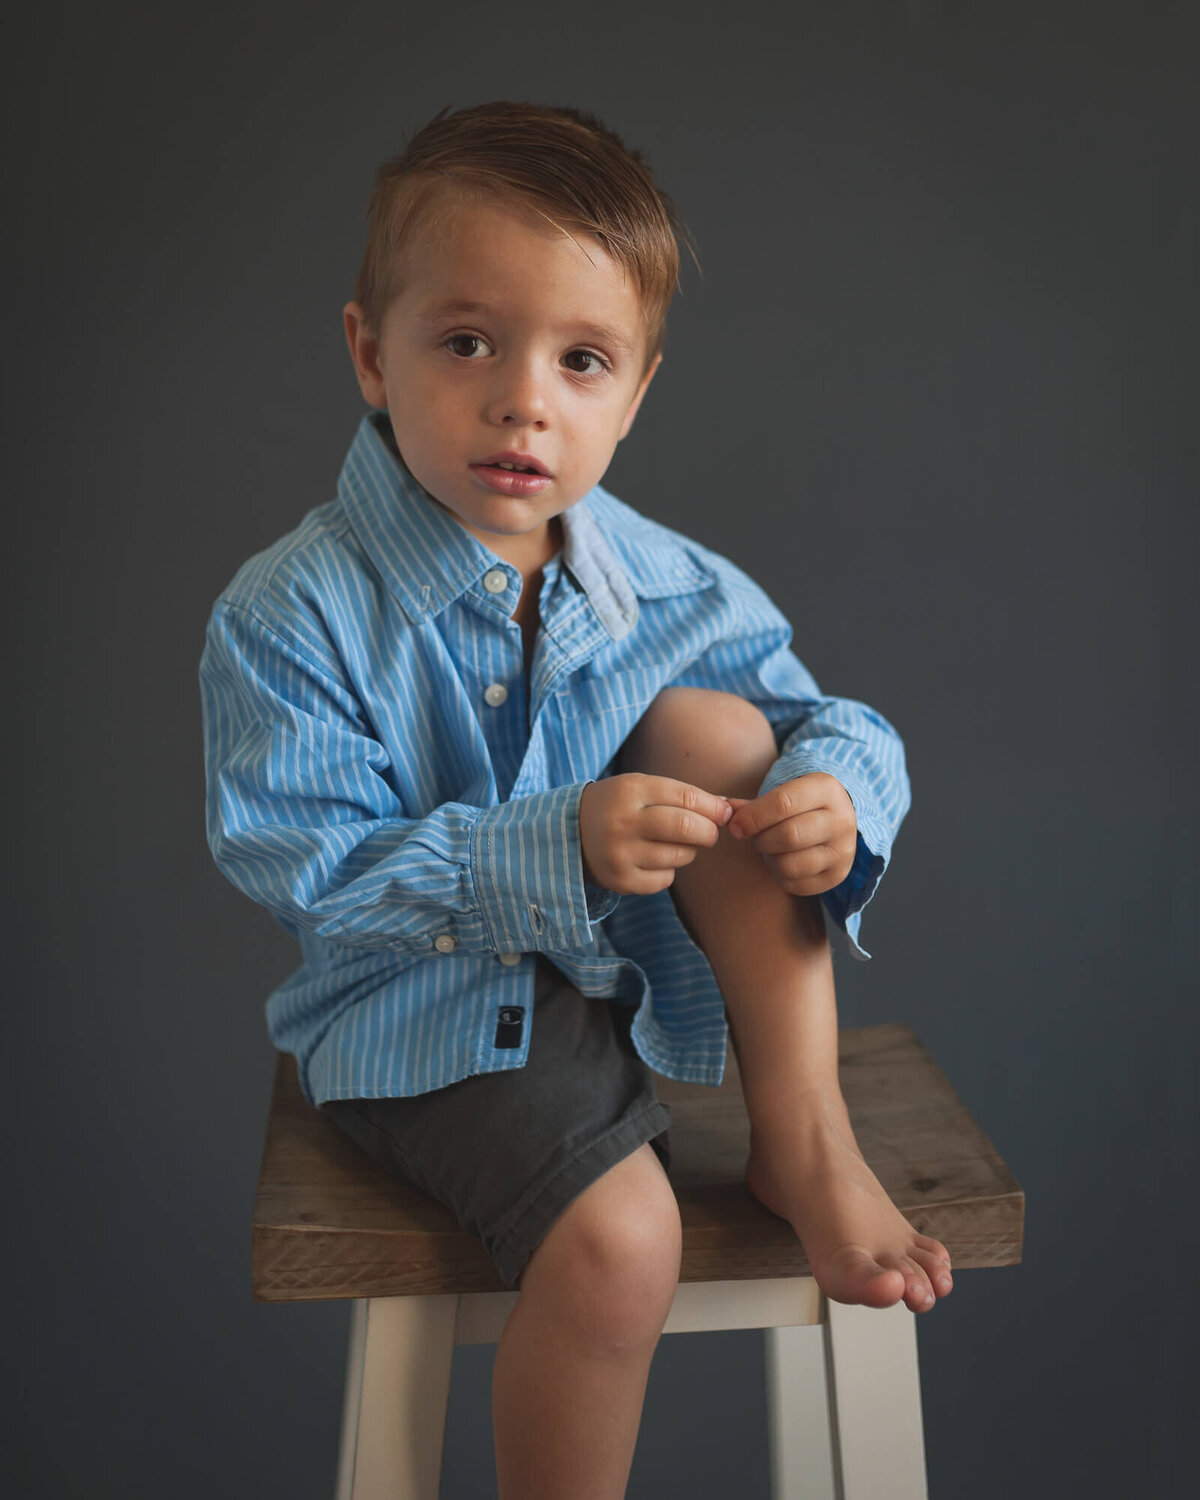 studio portrait of a preschool-aged boy on a stool  looking away wearing a blue  dress shirt and grey shorts, barefoot, with a grey backdrop